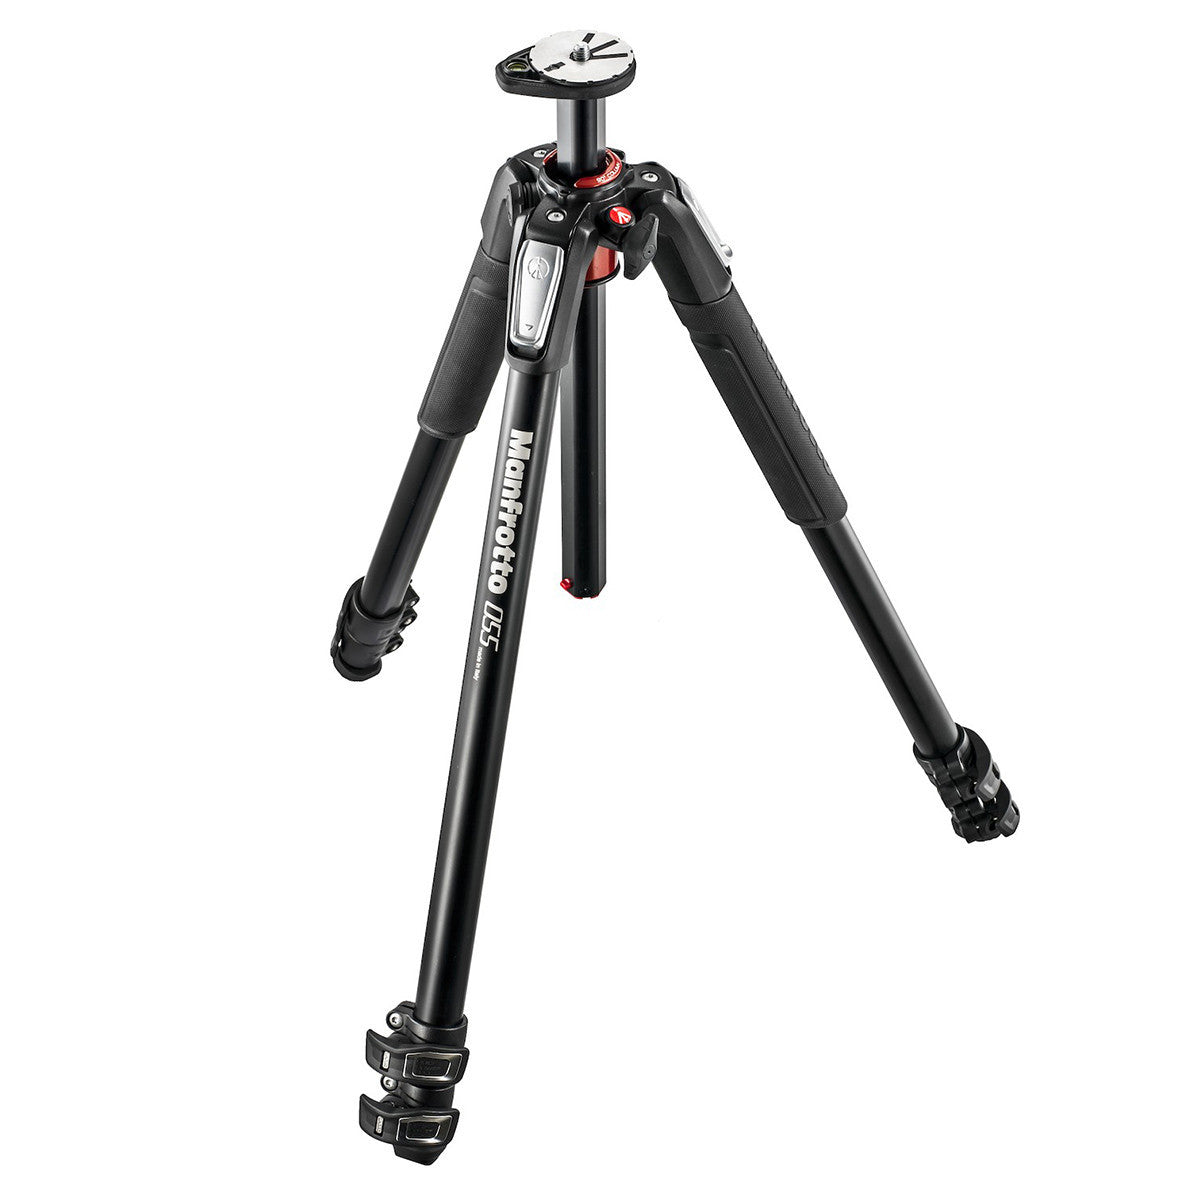 Manfrotto 055XPRO3 Aluminum Tripod in Manfrotto 055XPRO3 Aluminum Tripod - goHUNT Shop by GOHUNT | Manfrotto - GOHUNT Shop